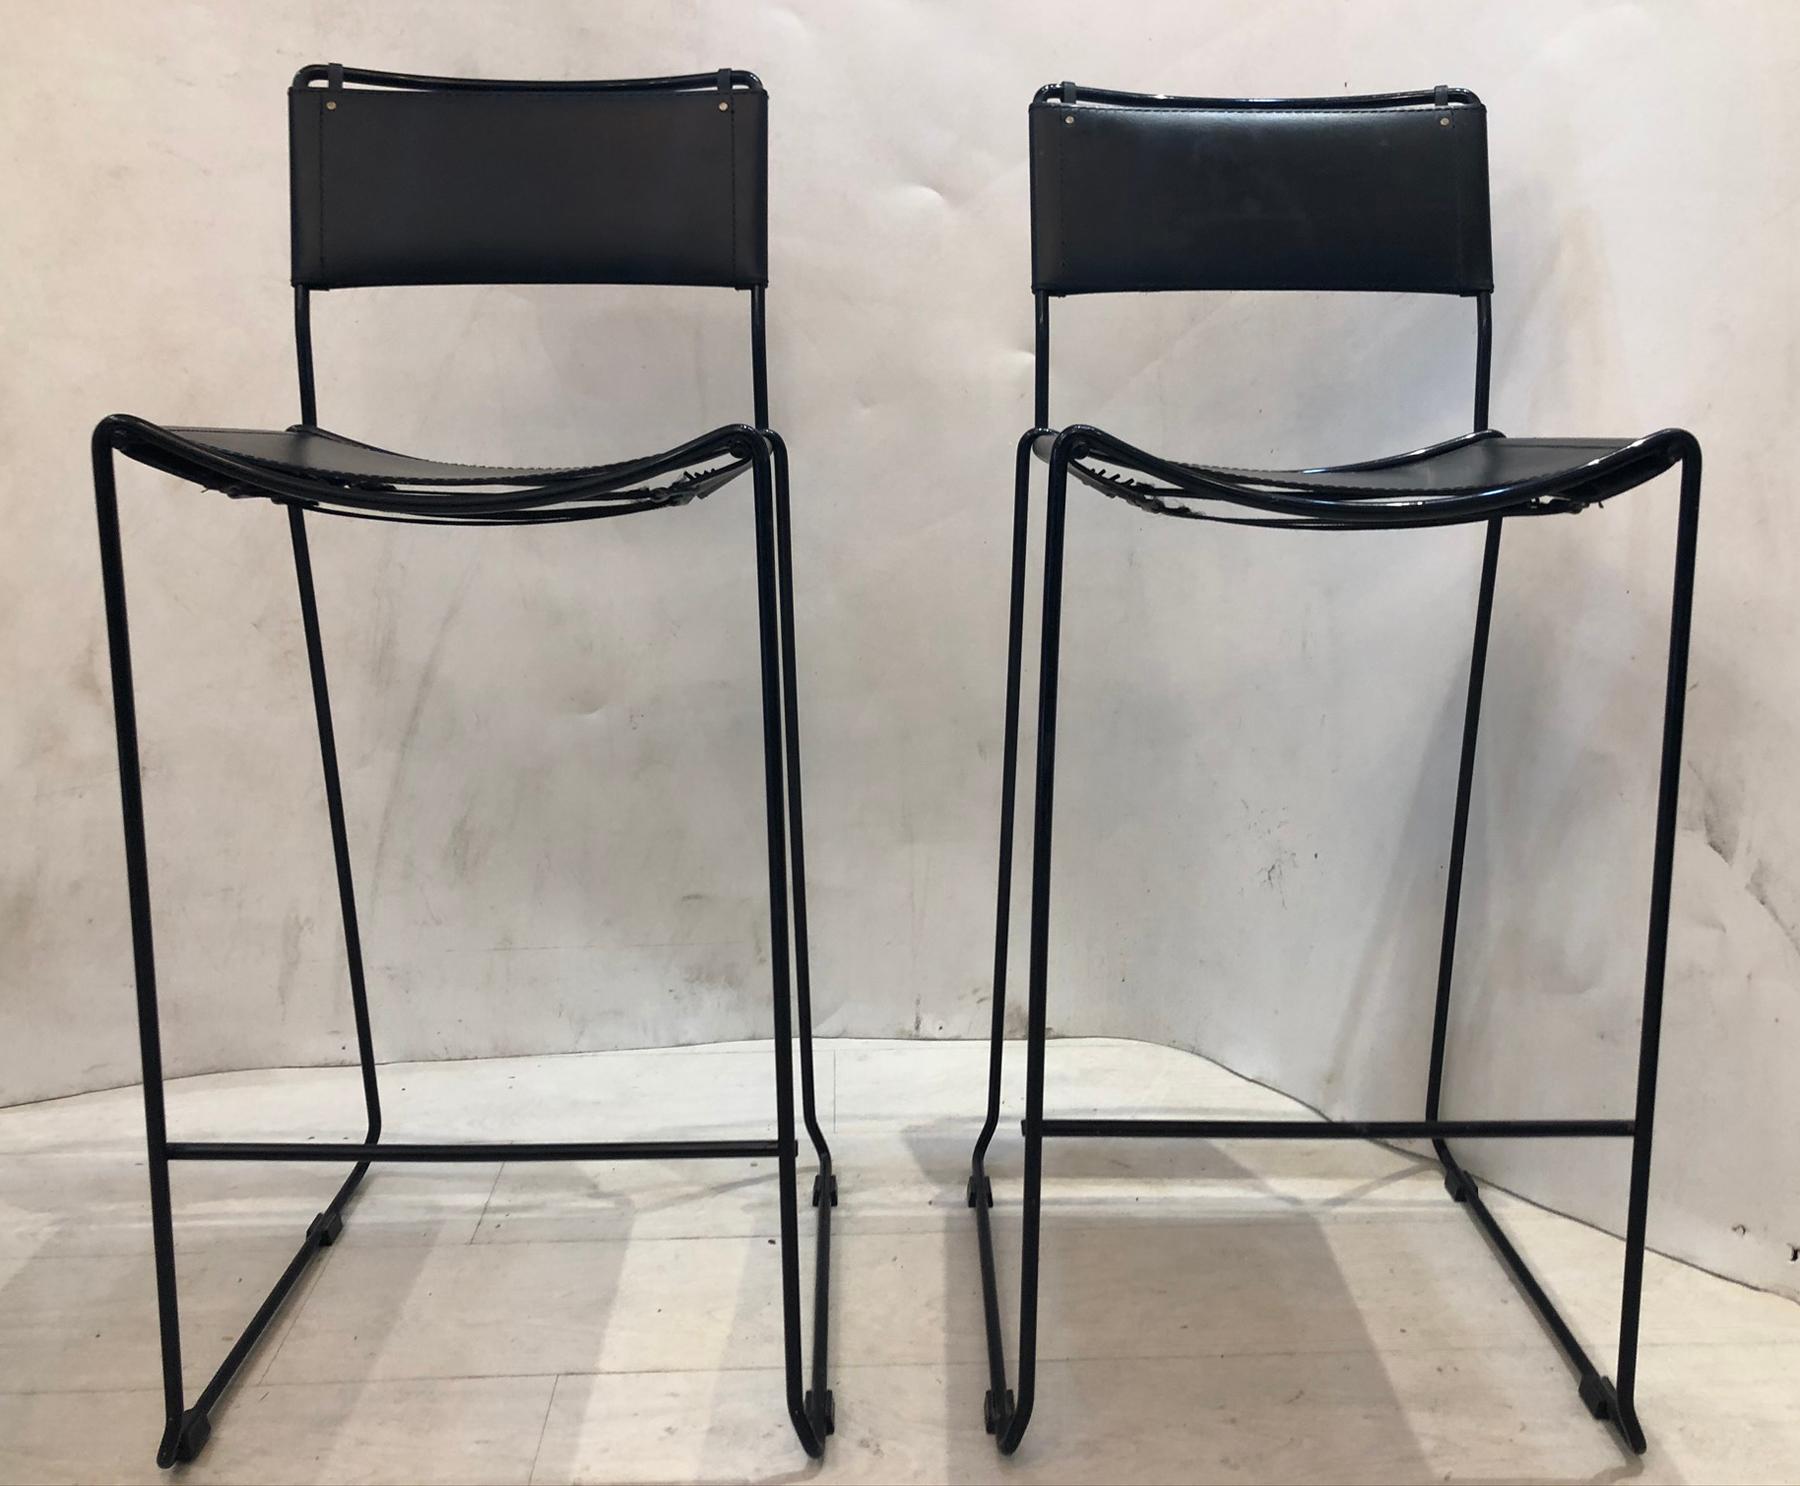 Vintage pair Italian leather with metal frames bar or counter stools. Made in Italy probably 1990s
Very good condition ready to use.